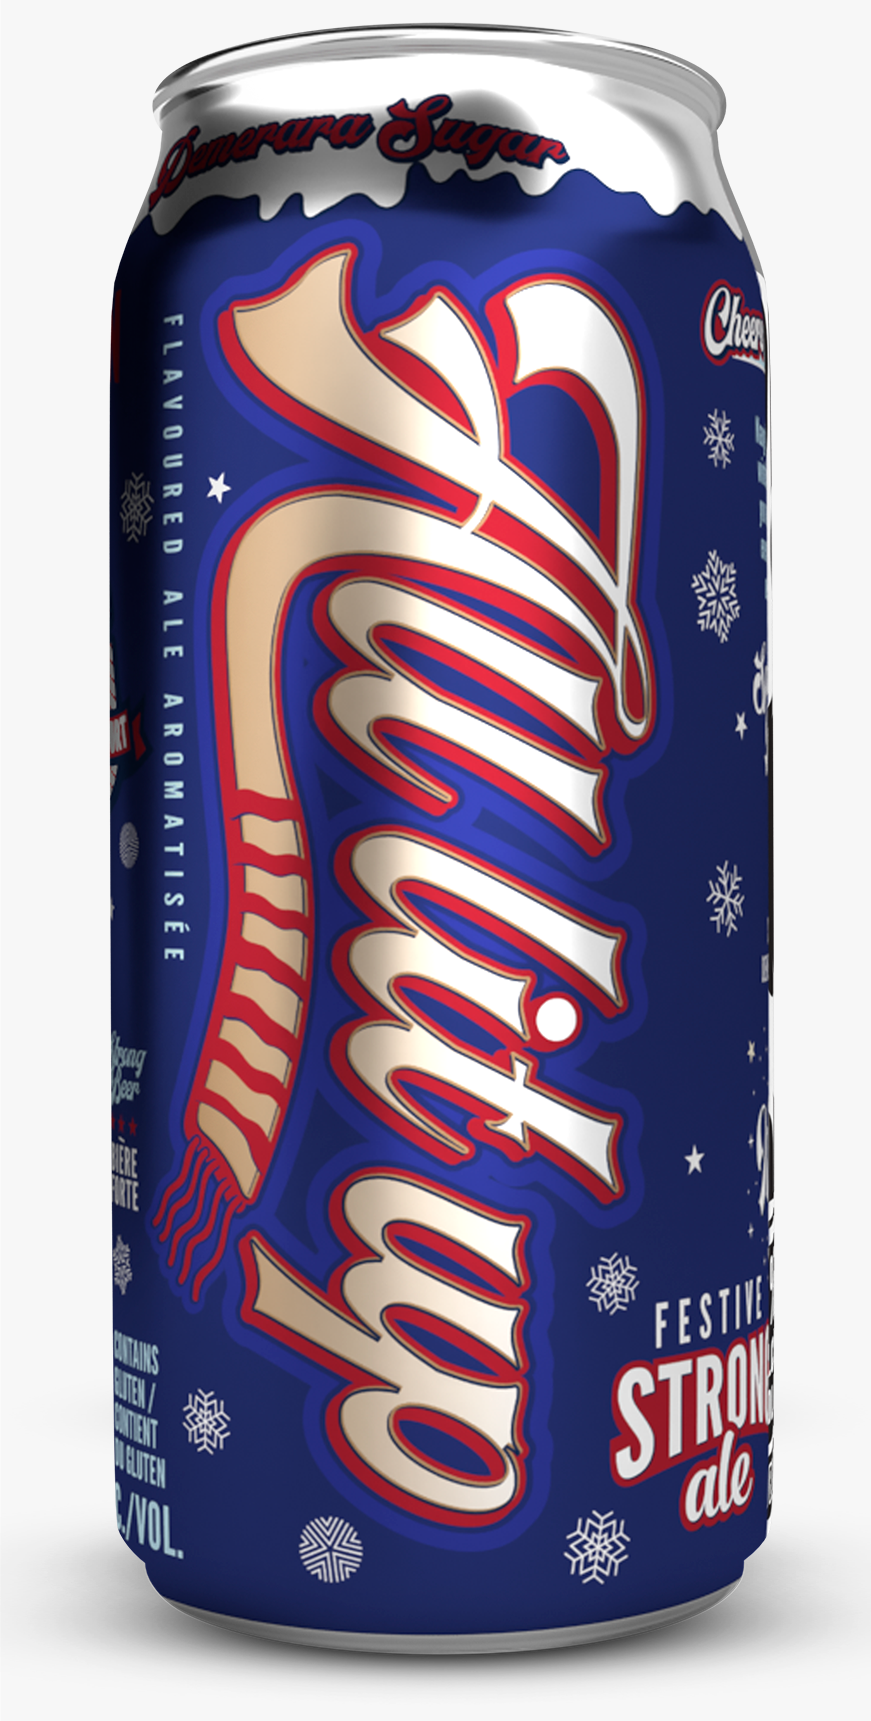 All Lit Up :  Festive Strong Ale:  6 Pack of 473 ml cans